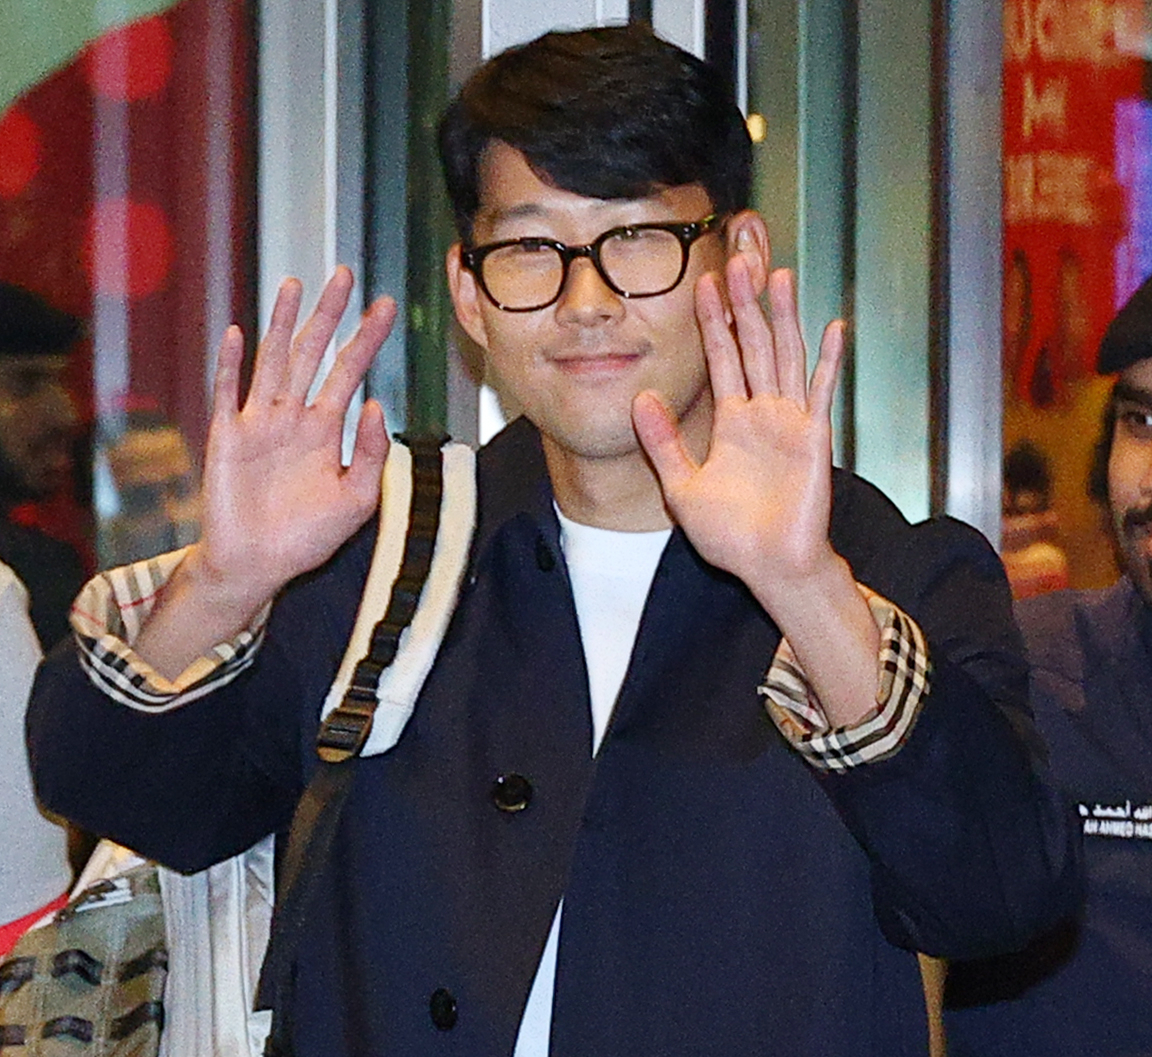 South Korea captain Son Heung-min waves to cameras after arriving at Hamad International Airport in Doha for the FIFA World Cup on Wednesday. (Yonhap)